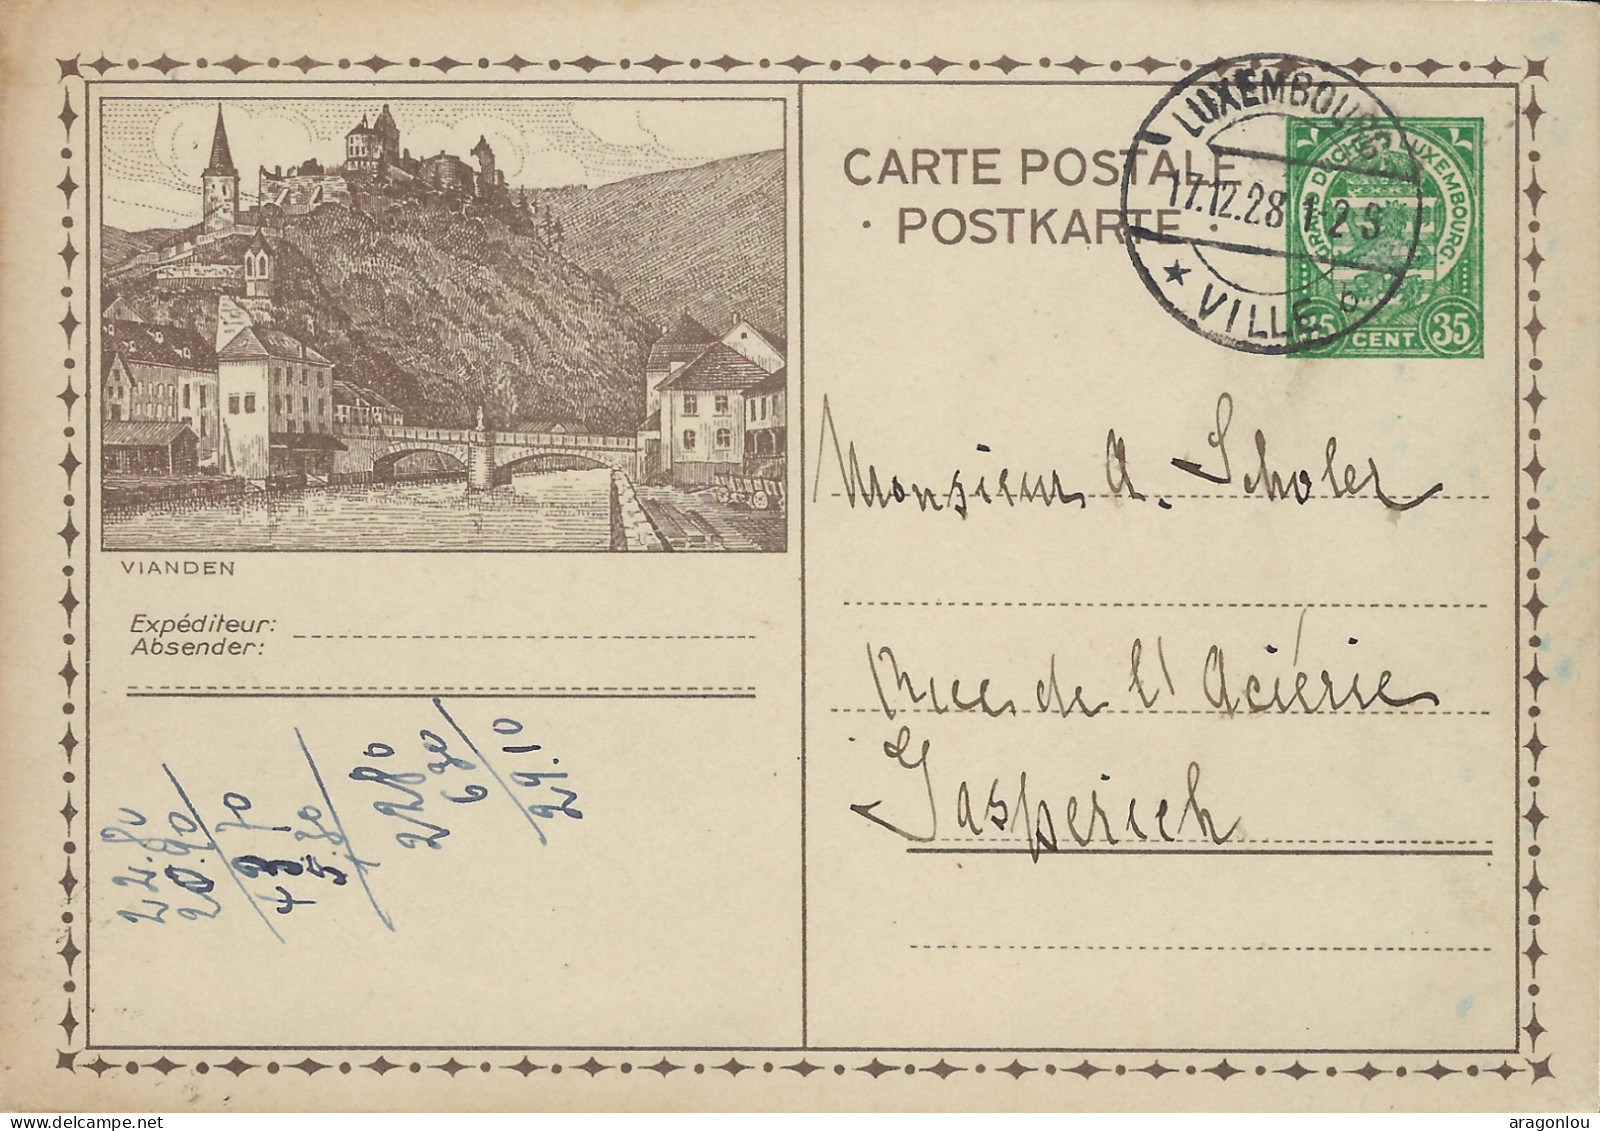 Luxembourg - Luxemburg - Carte - Postale 1928    Vianden -  Cachets   Luxembourg - Ville - Stamped Stationery